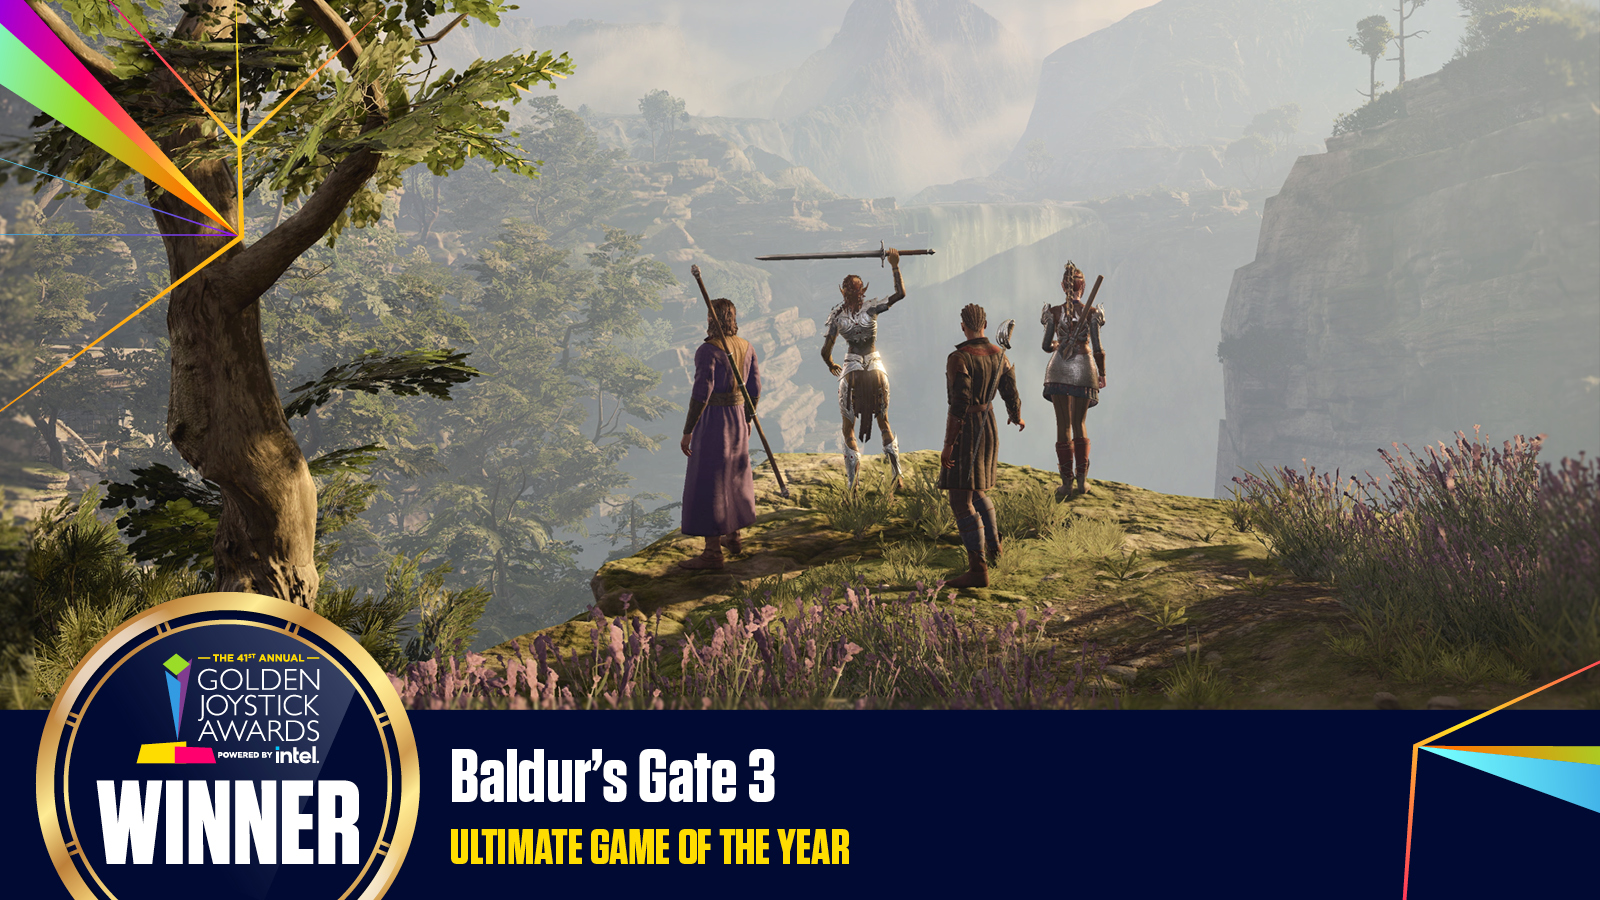 Golden Joysticks on X: The 41st Golden Joystick Awards Powered by @intel  take place this Friday, November 10 when we'll find out which games get the  gongs. The show will be hosted